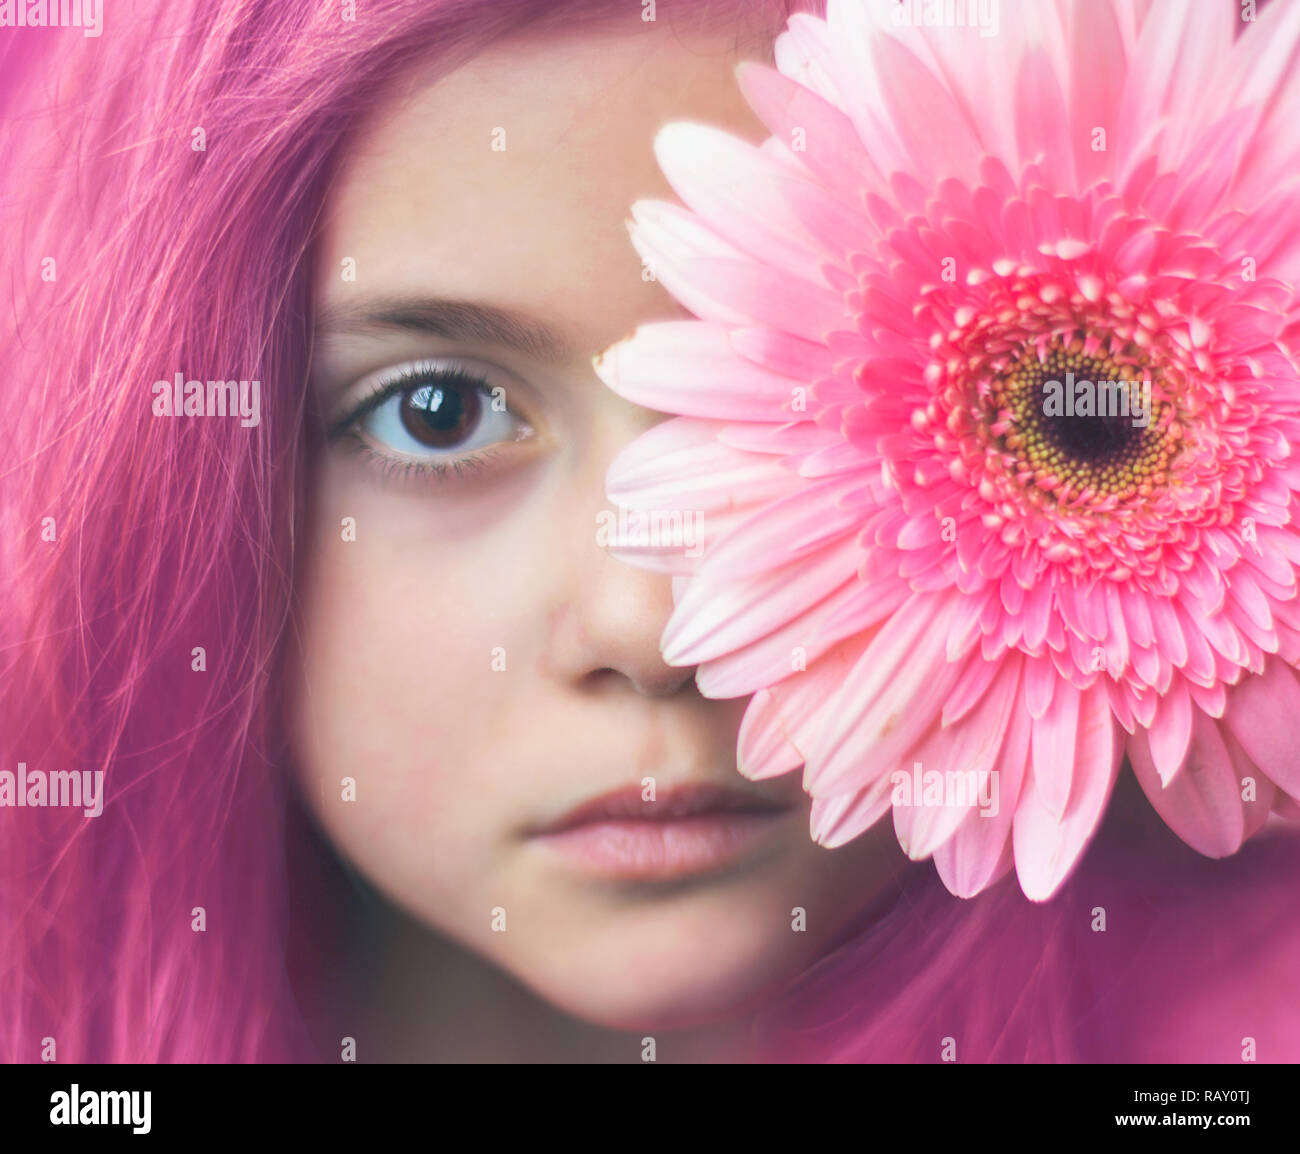 Portrait of a little girl with pink hair and pink flower over her eye Stock Photo